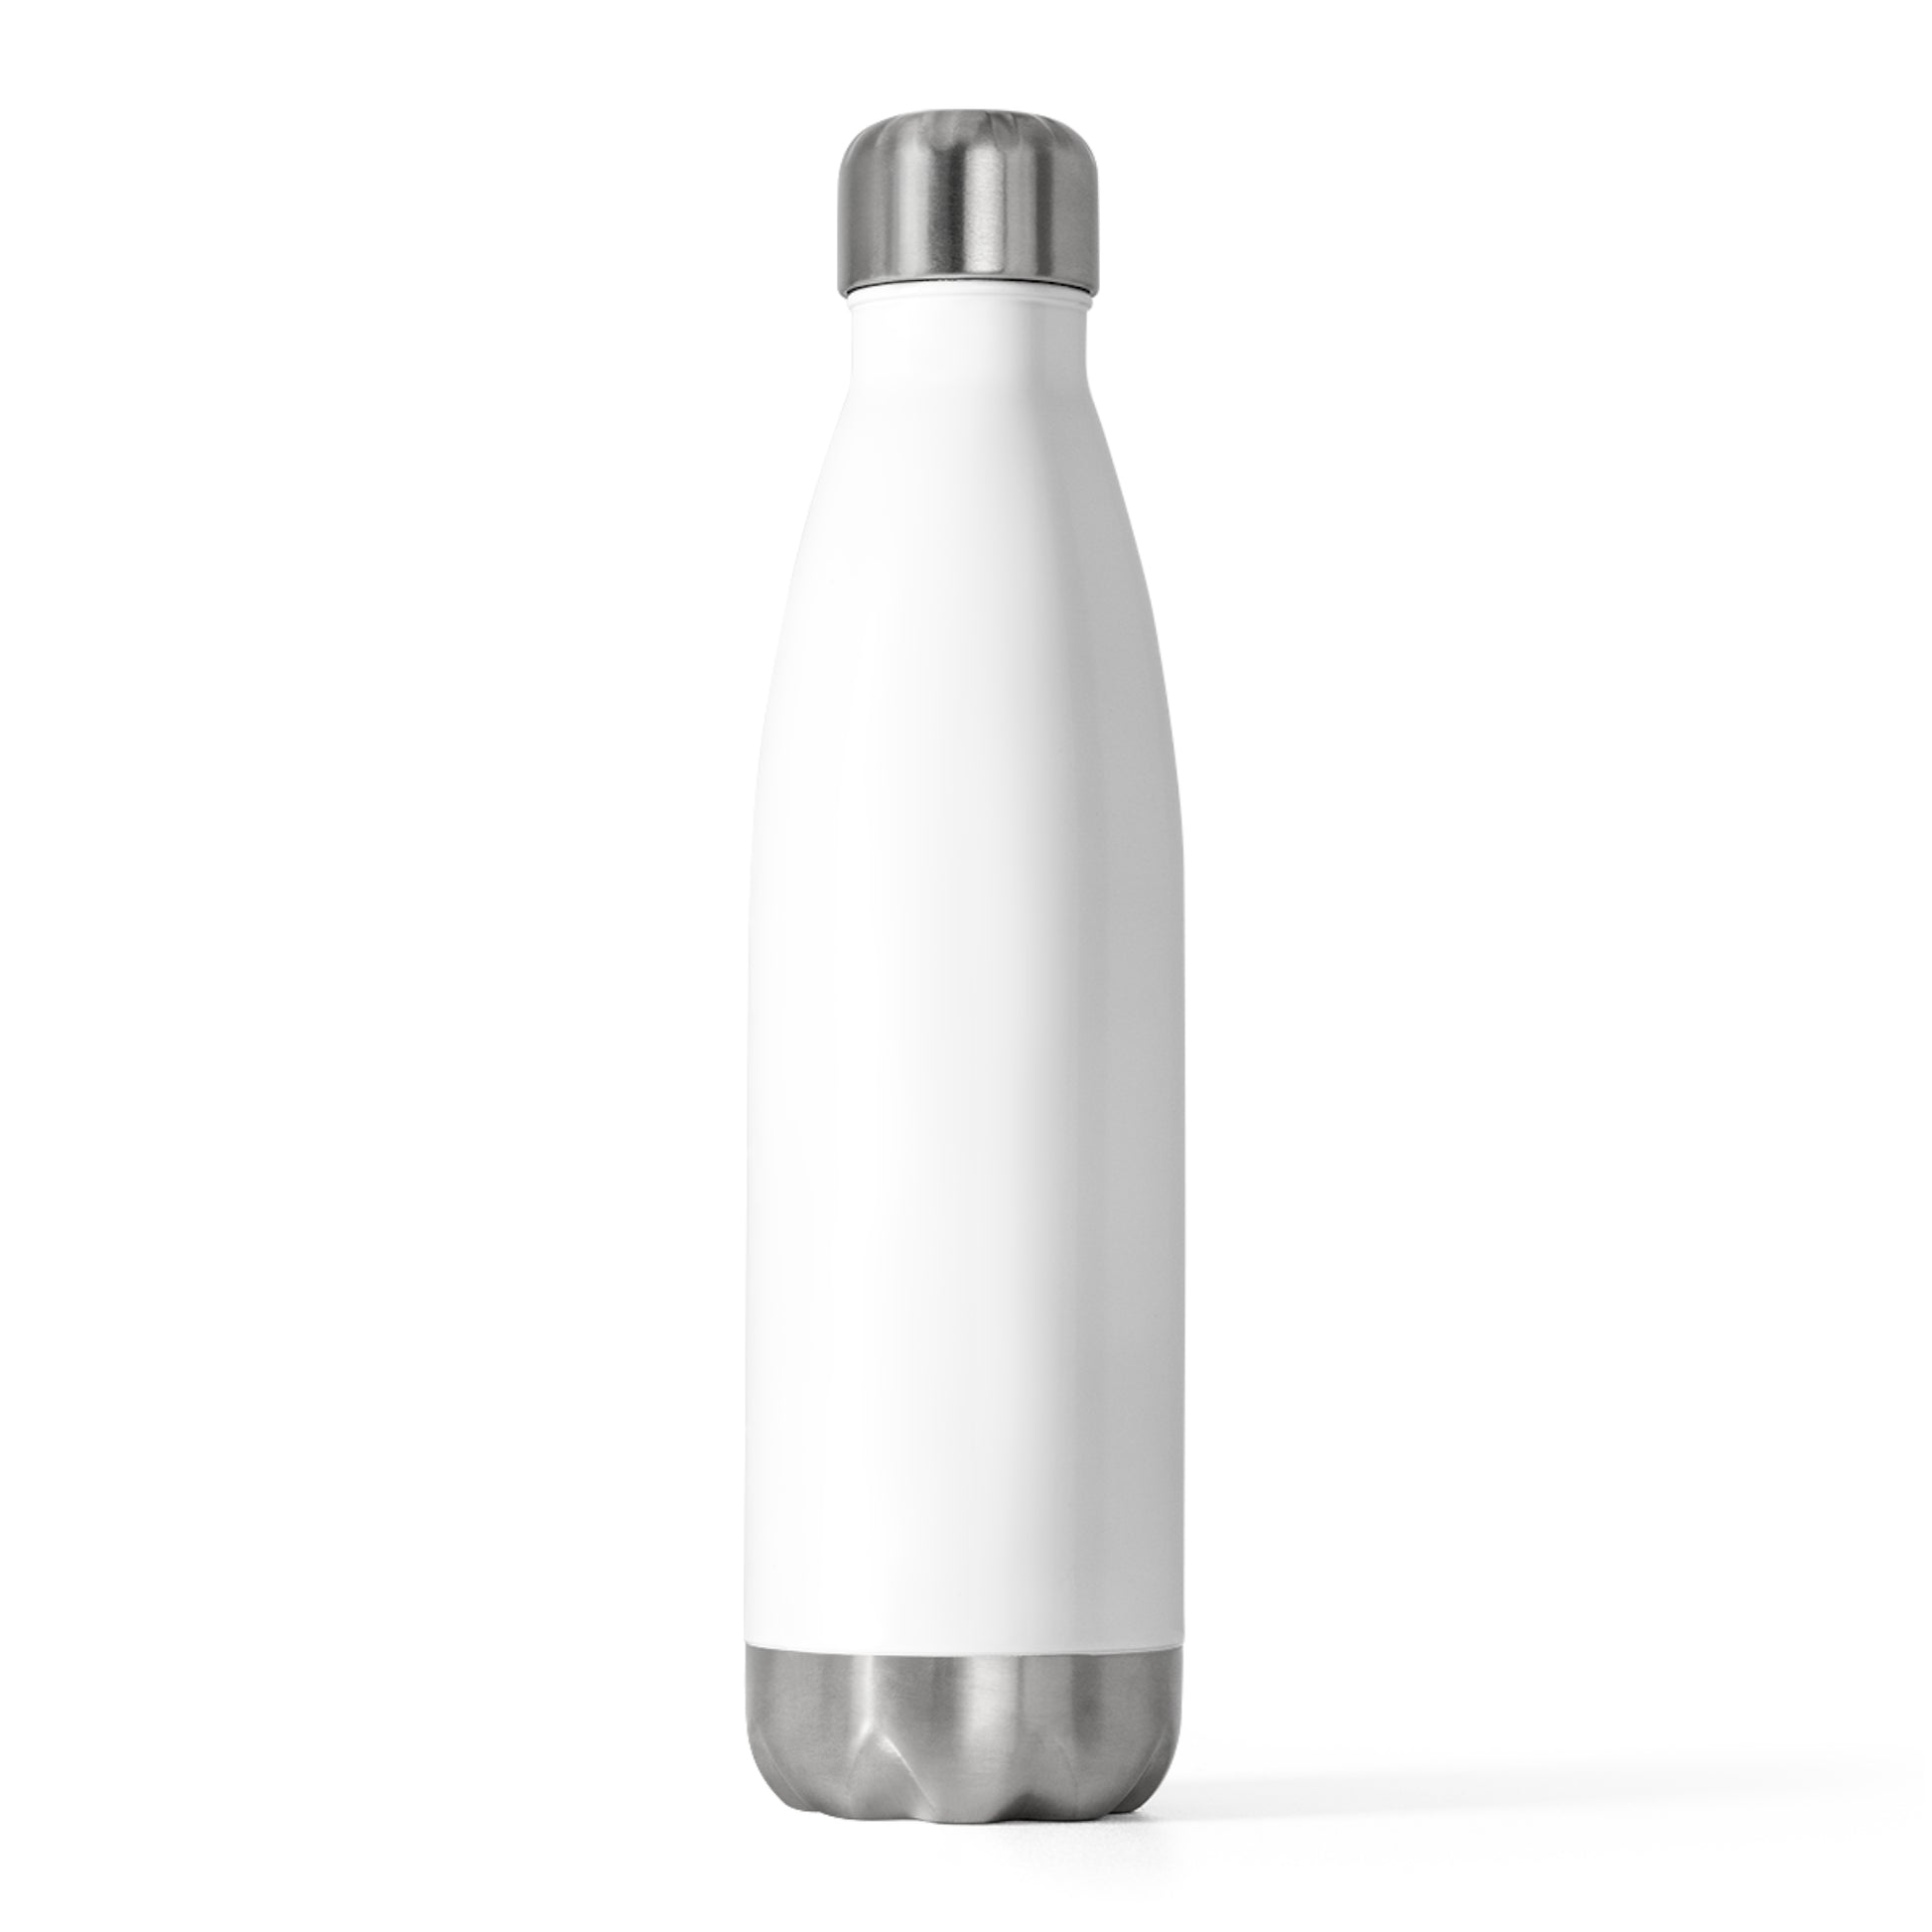 God Is Greater Insulated Bottle Printify